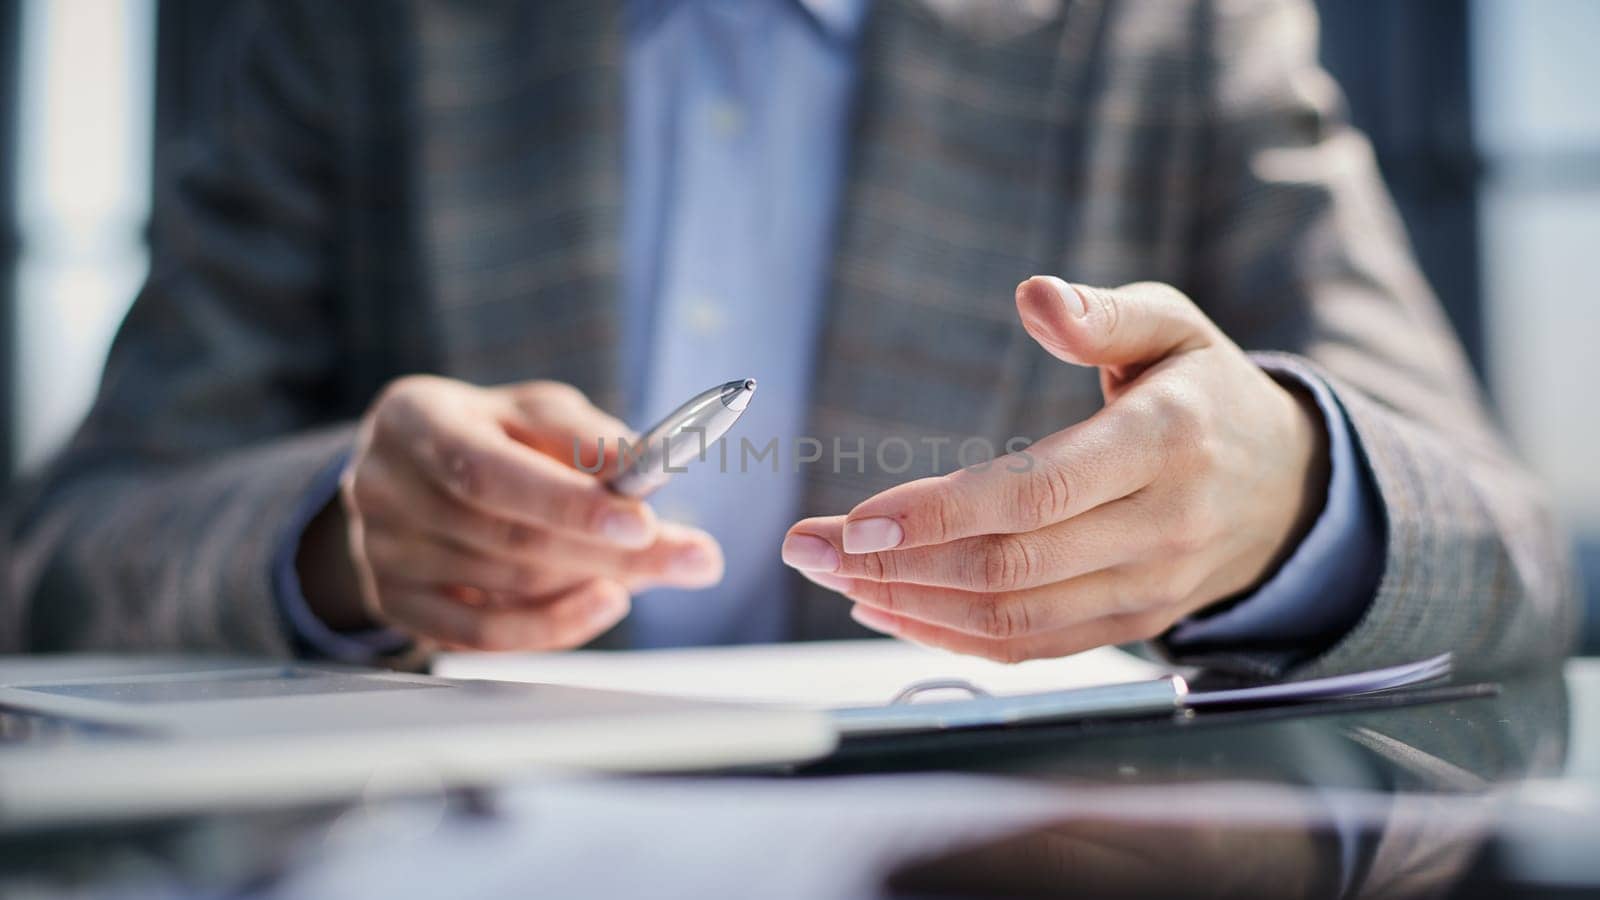 The hand that held the lawyer's pen, the concept of signing a contract